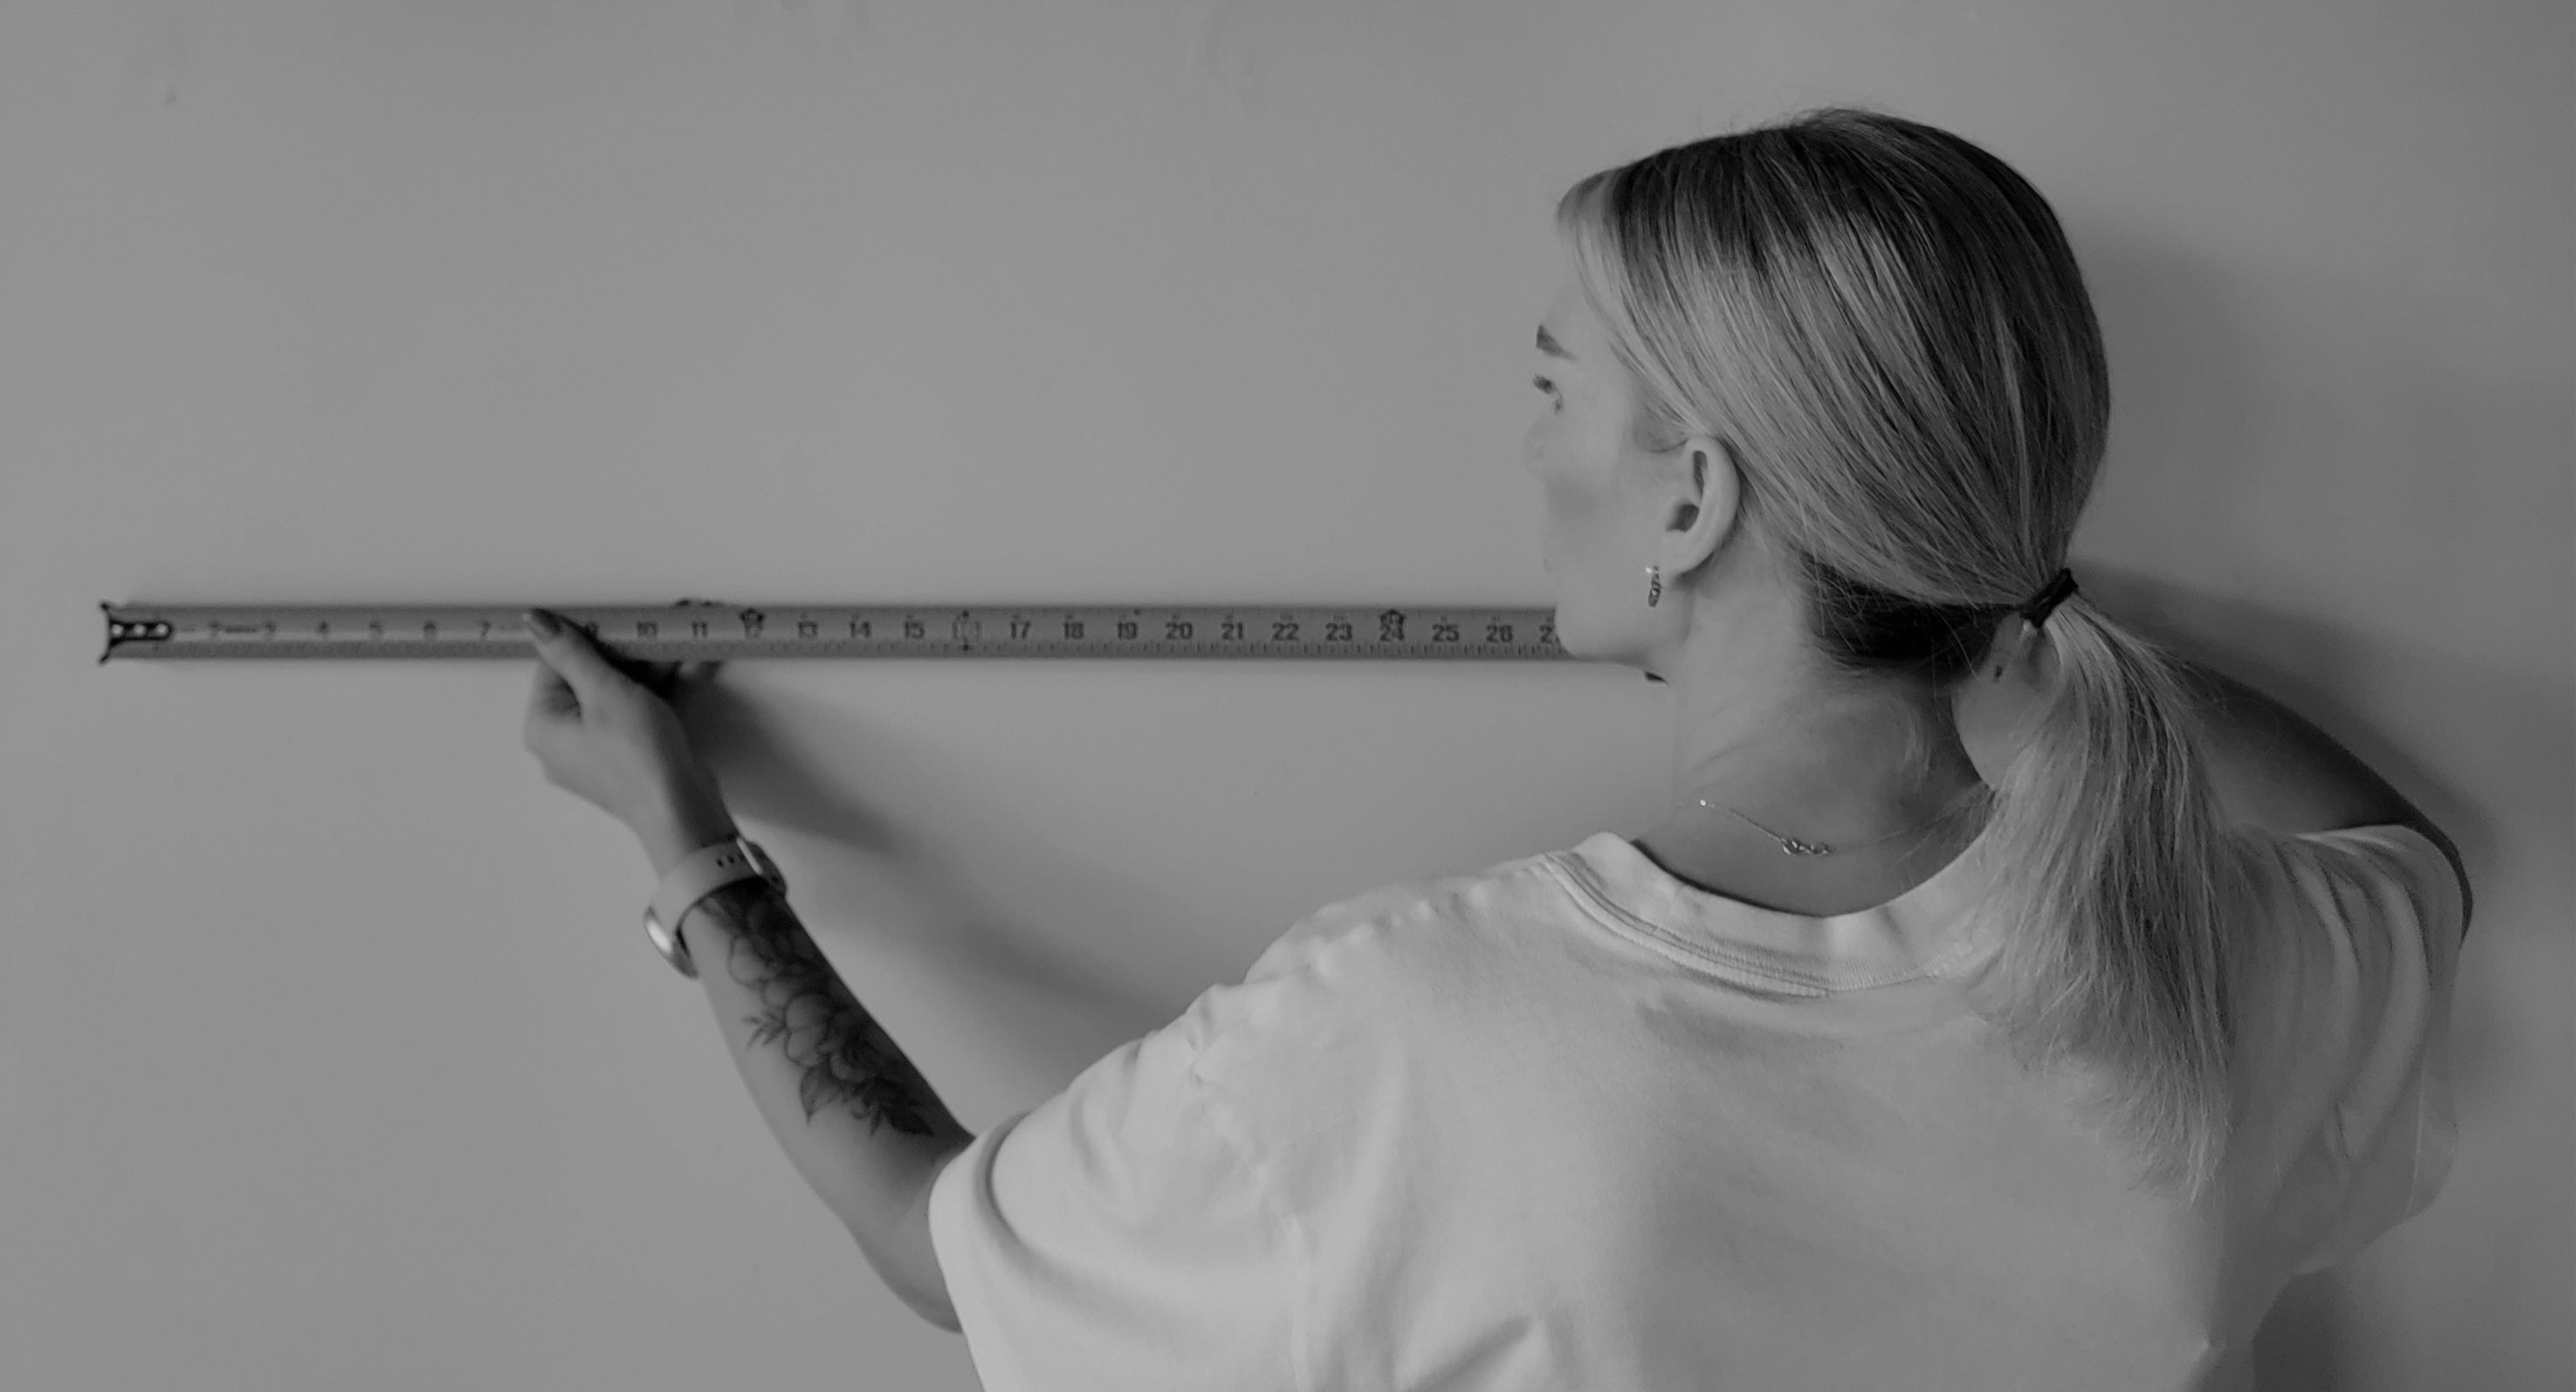 The Complete Guide To Measuring Your Walls For Removable Wallpaper